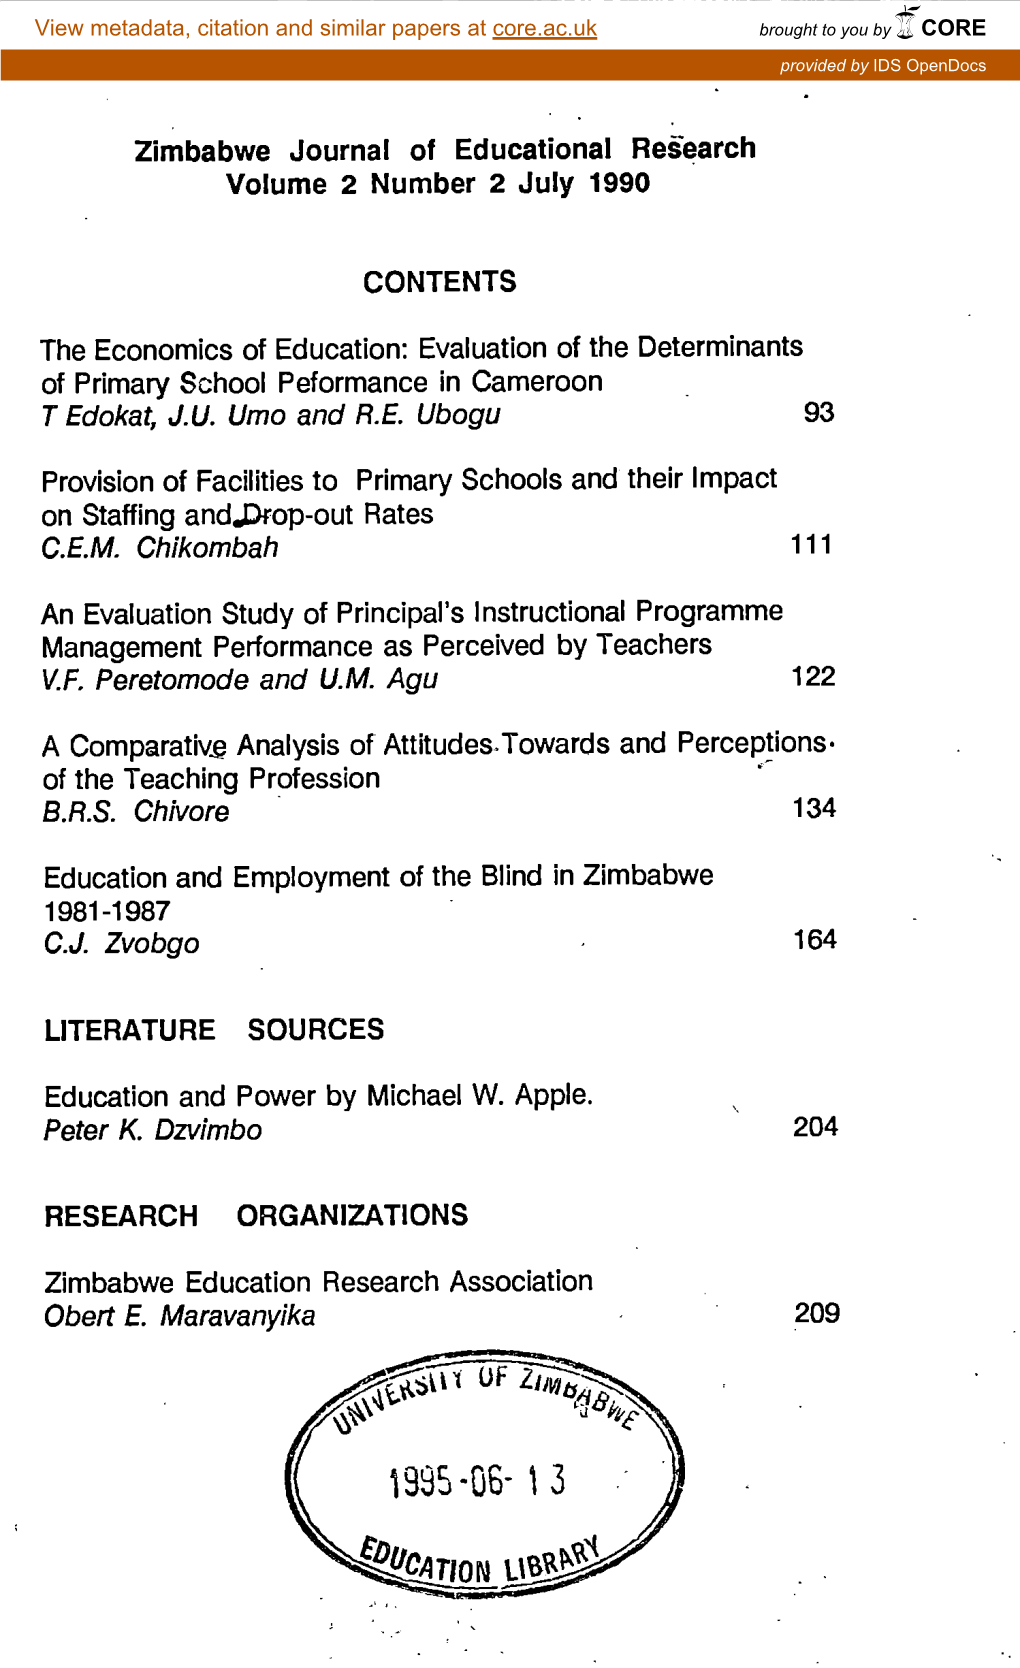 Zimbabwe Journal of Educational Research Volume 2 Number 2 July 1990